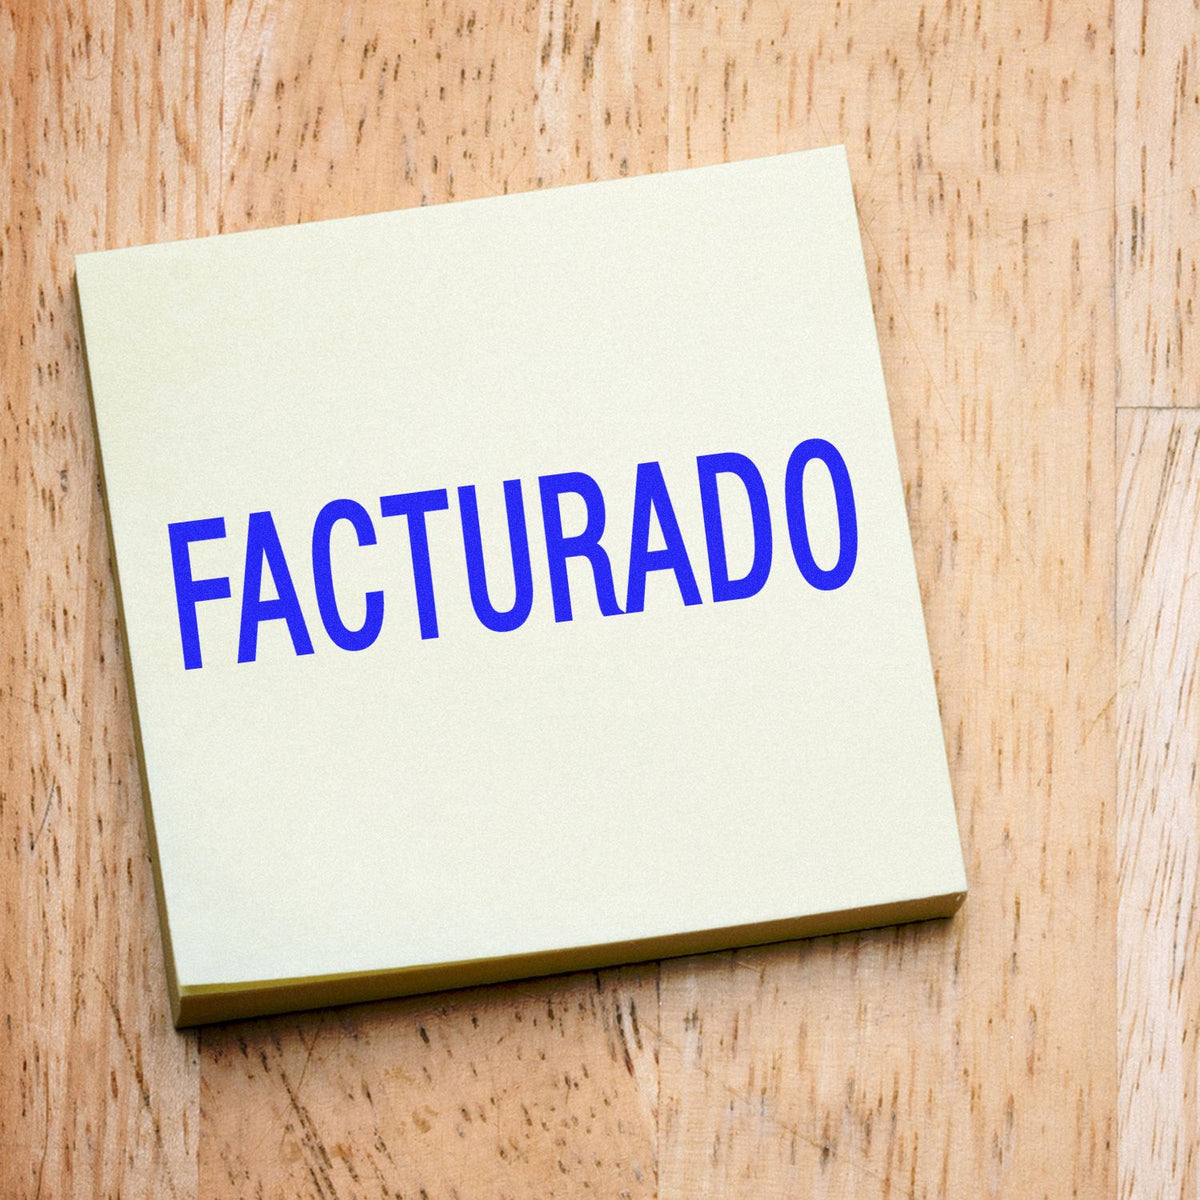 Facturado Rubber Stamp In Use Photo